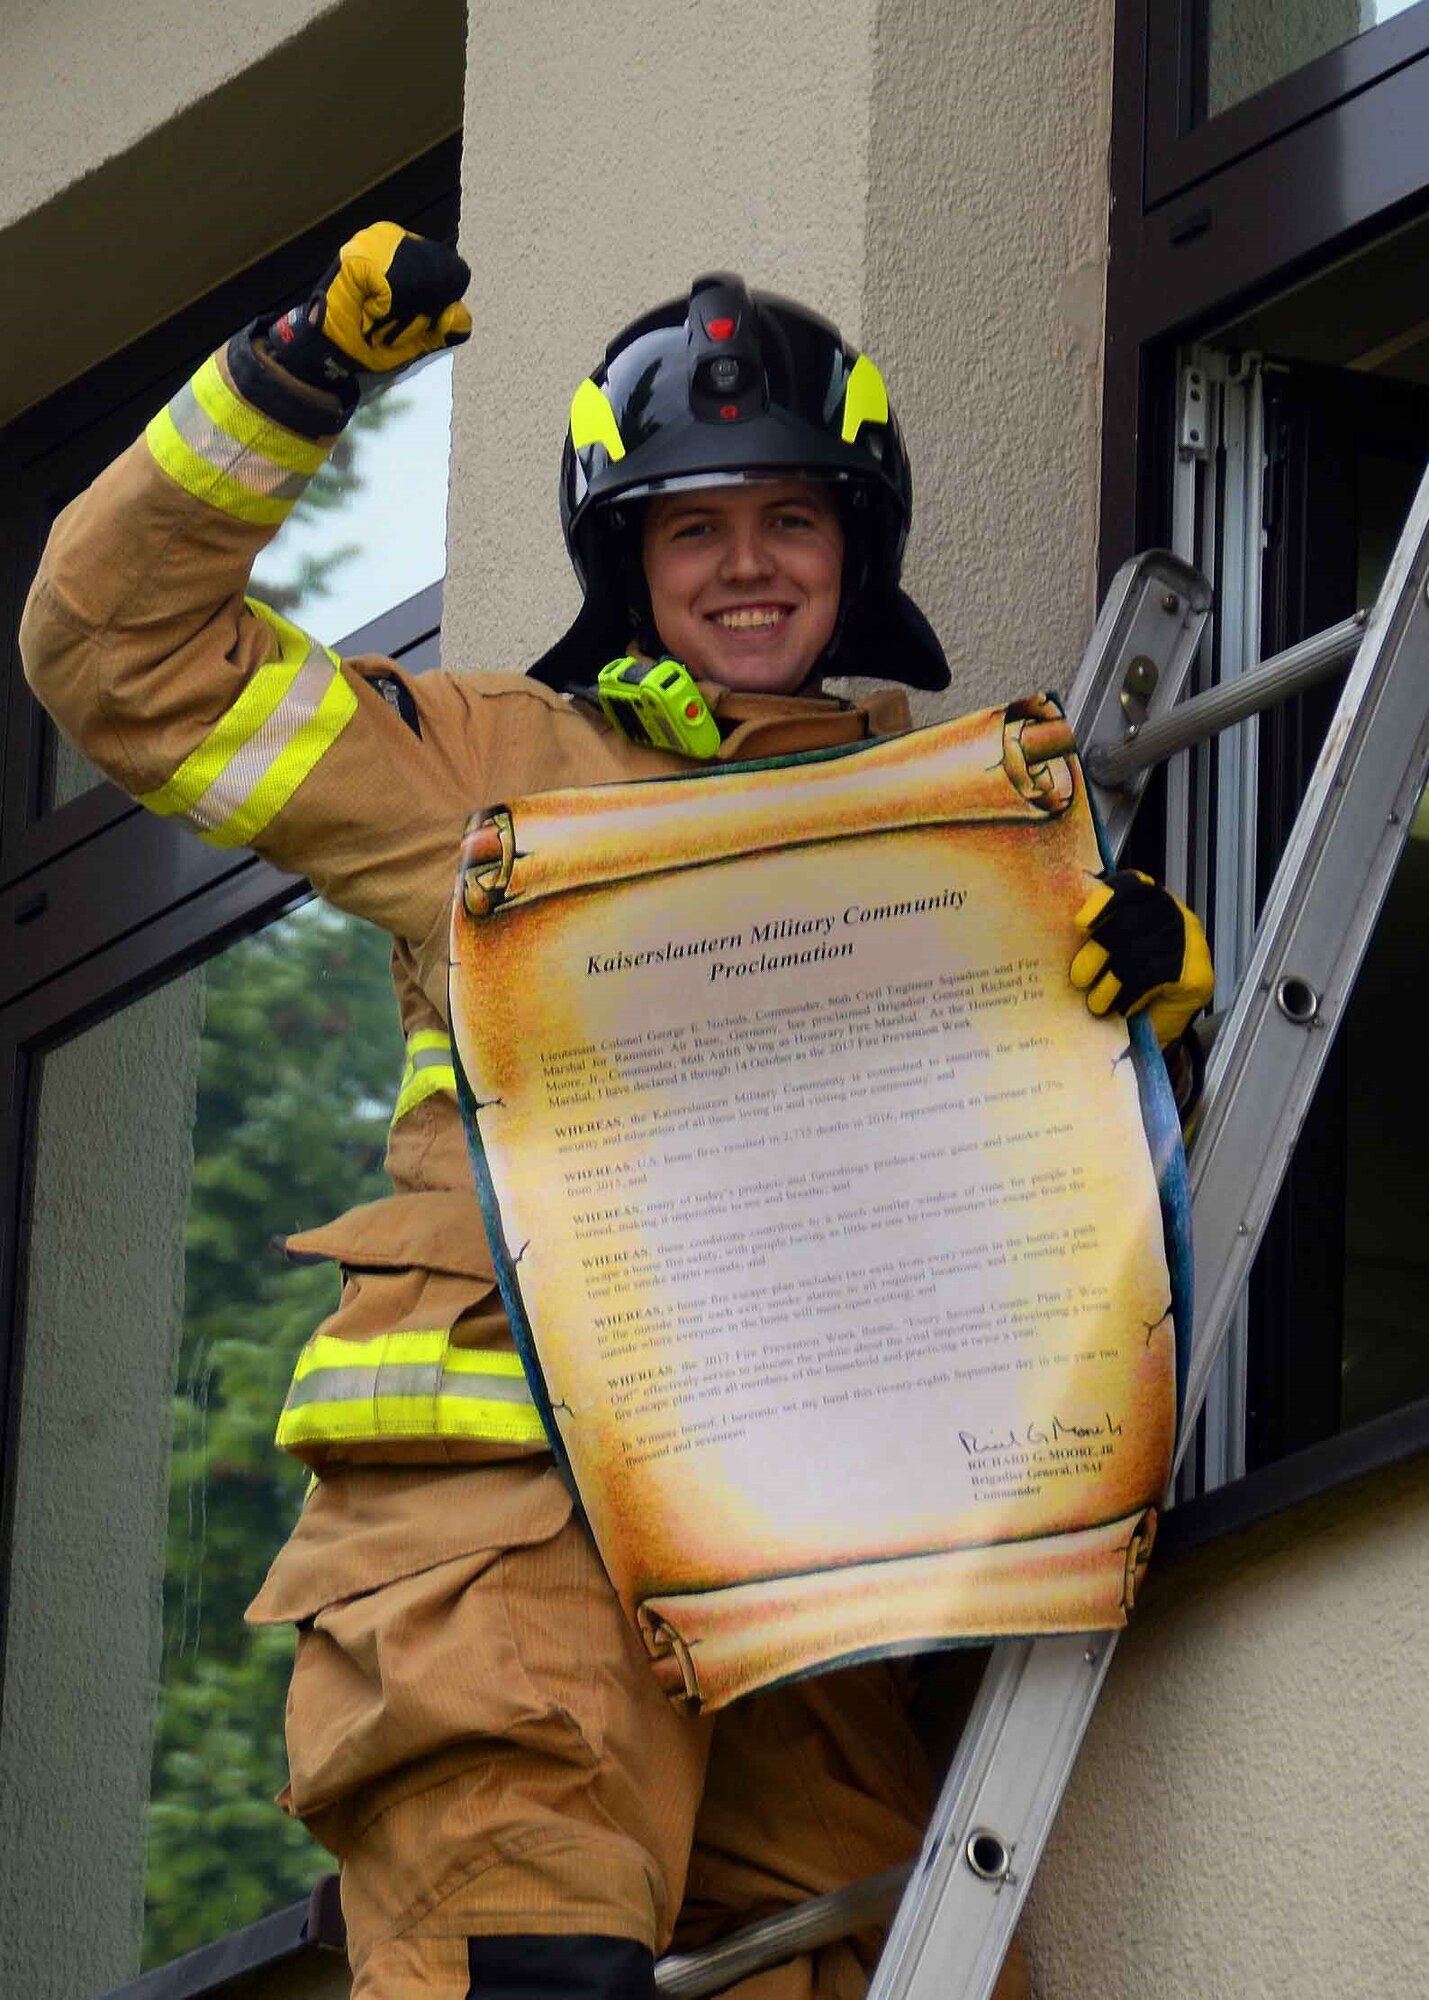 This year’s Fire Prevention Week theme, “Every second counts, plan two ways out!”, is to encourage people to have more than one safe exit during a fire incident. (U.S. Air Force photo by Airman 1st Class Savannah L. Waters)